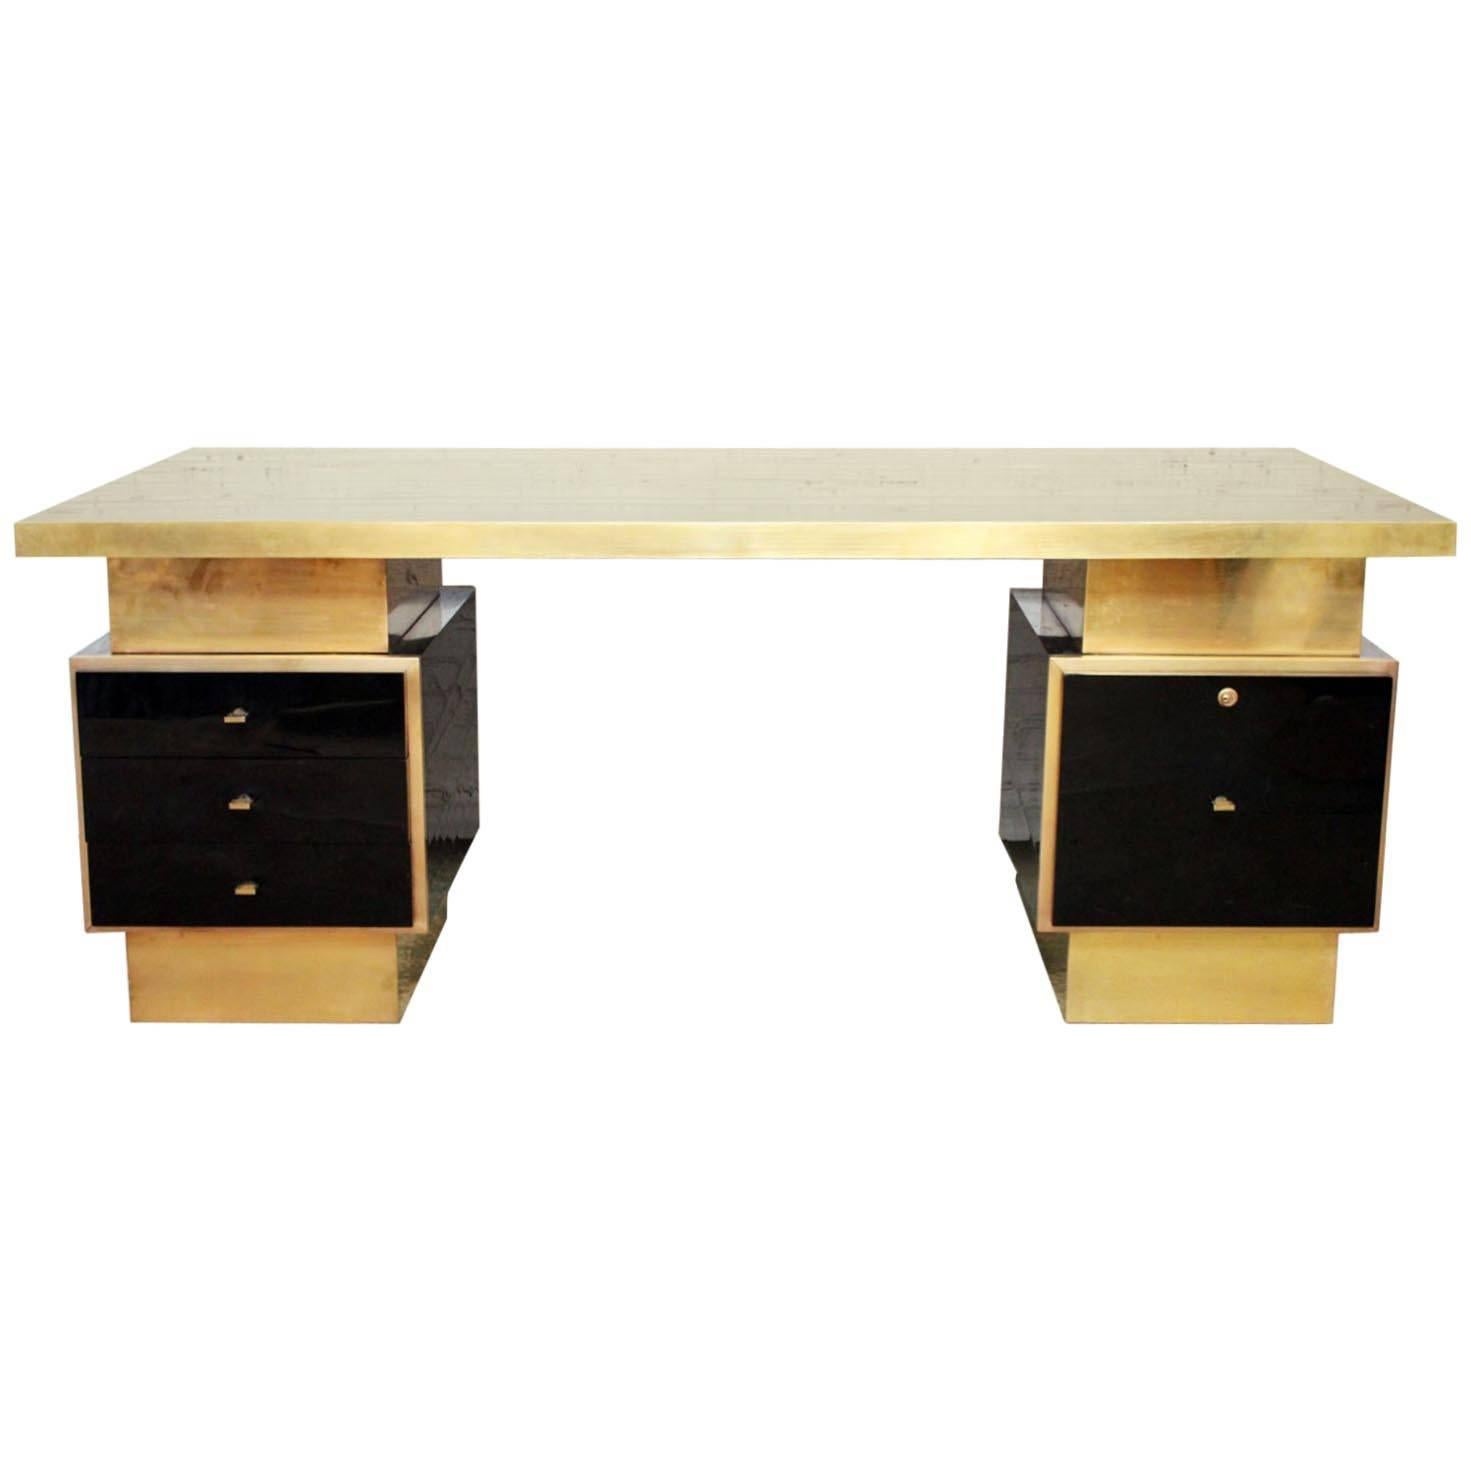 1970s Textured Black Lacquer and Brass Executive Desk by Guy Lefevre